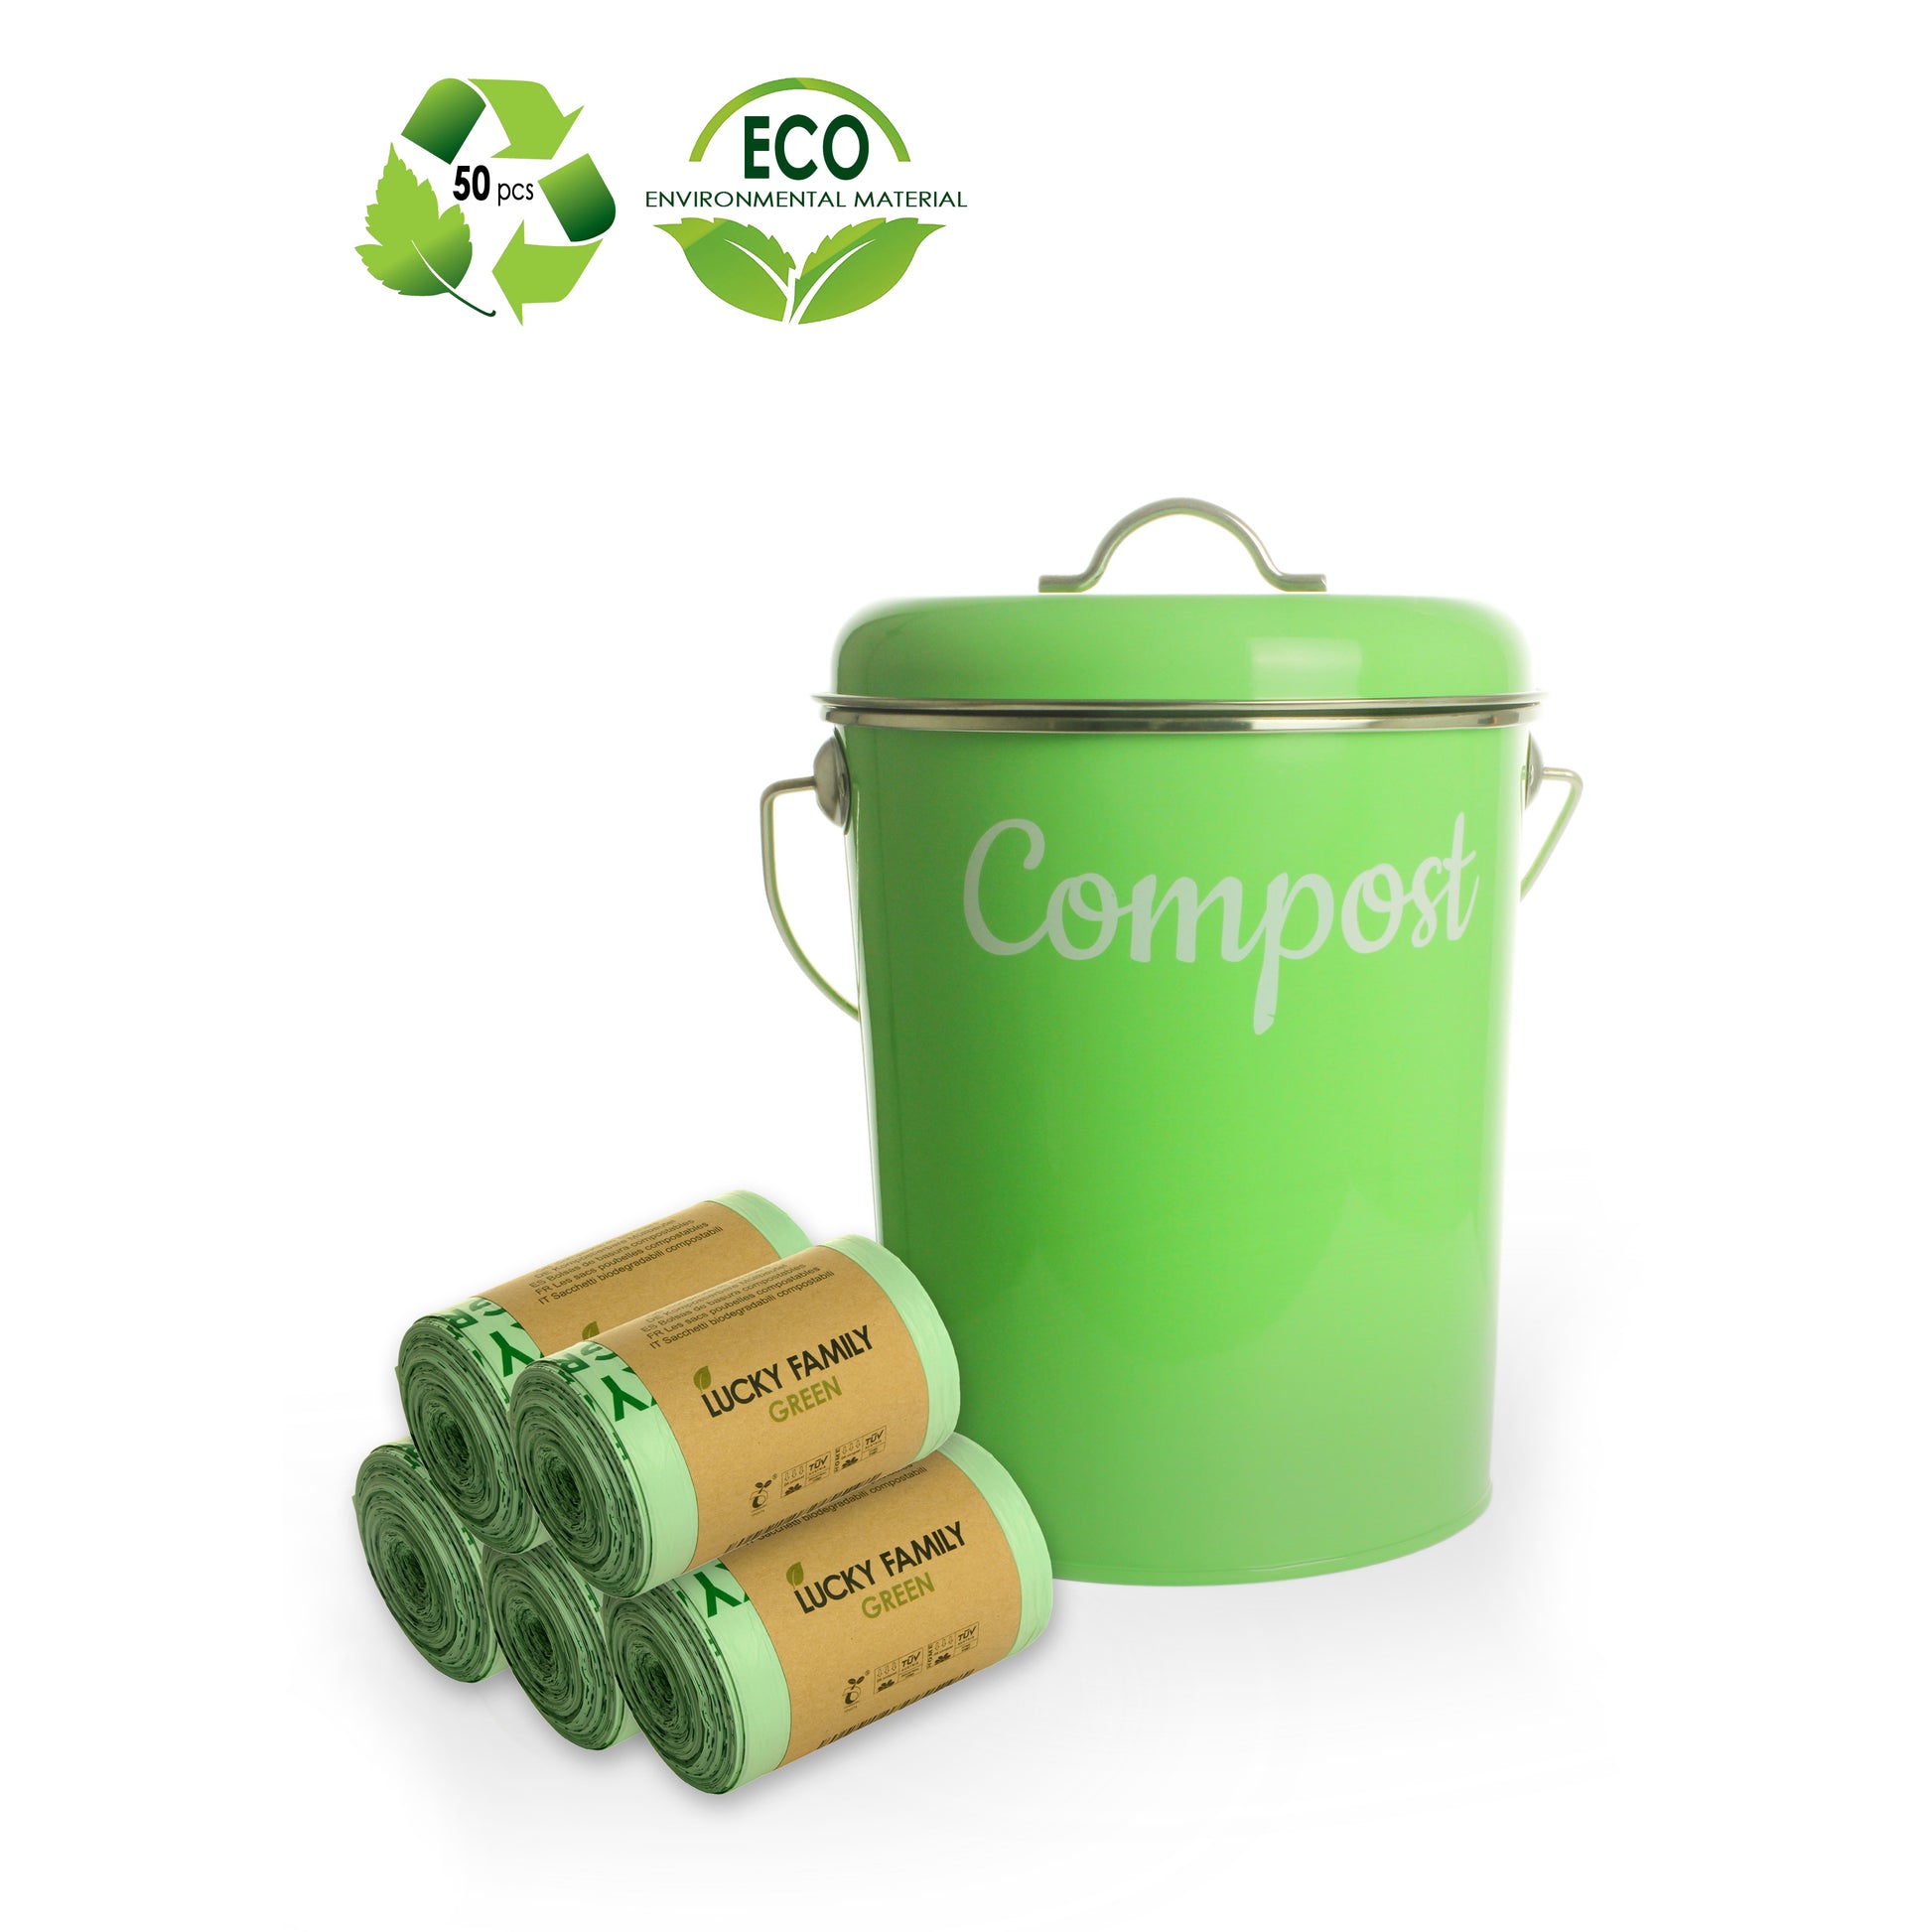  Composting Bag，Reusable Leaf Lawn Bags，Collapsible Yard Waste  Bags Compost Bins with Lid for Kitchen, 15 Gallon/34 Gallon Multifunction  Gardening Container，Come with Gloves ( Size : 15 Gallon ) : Patio